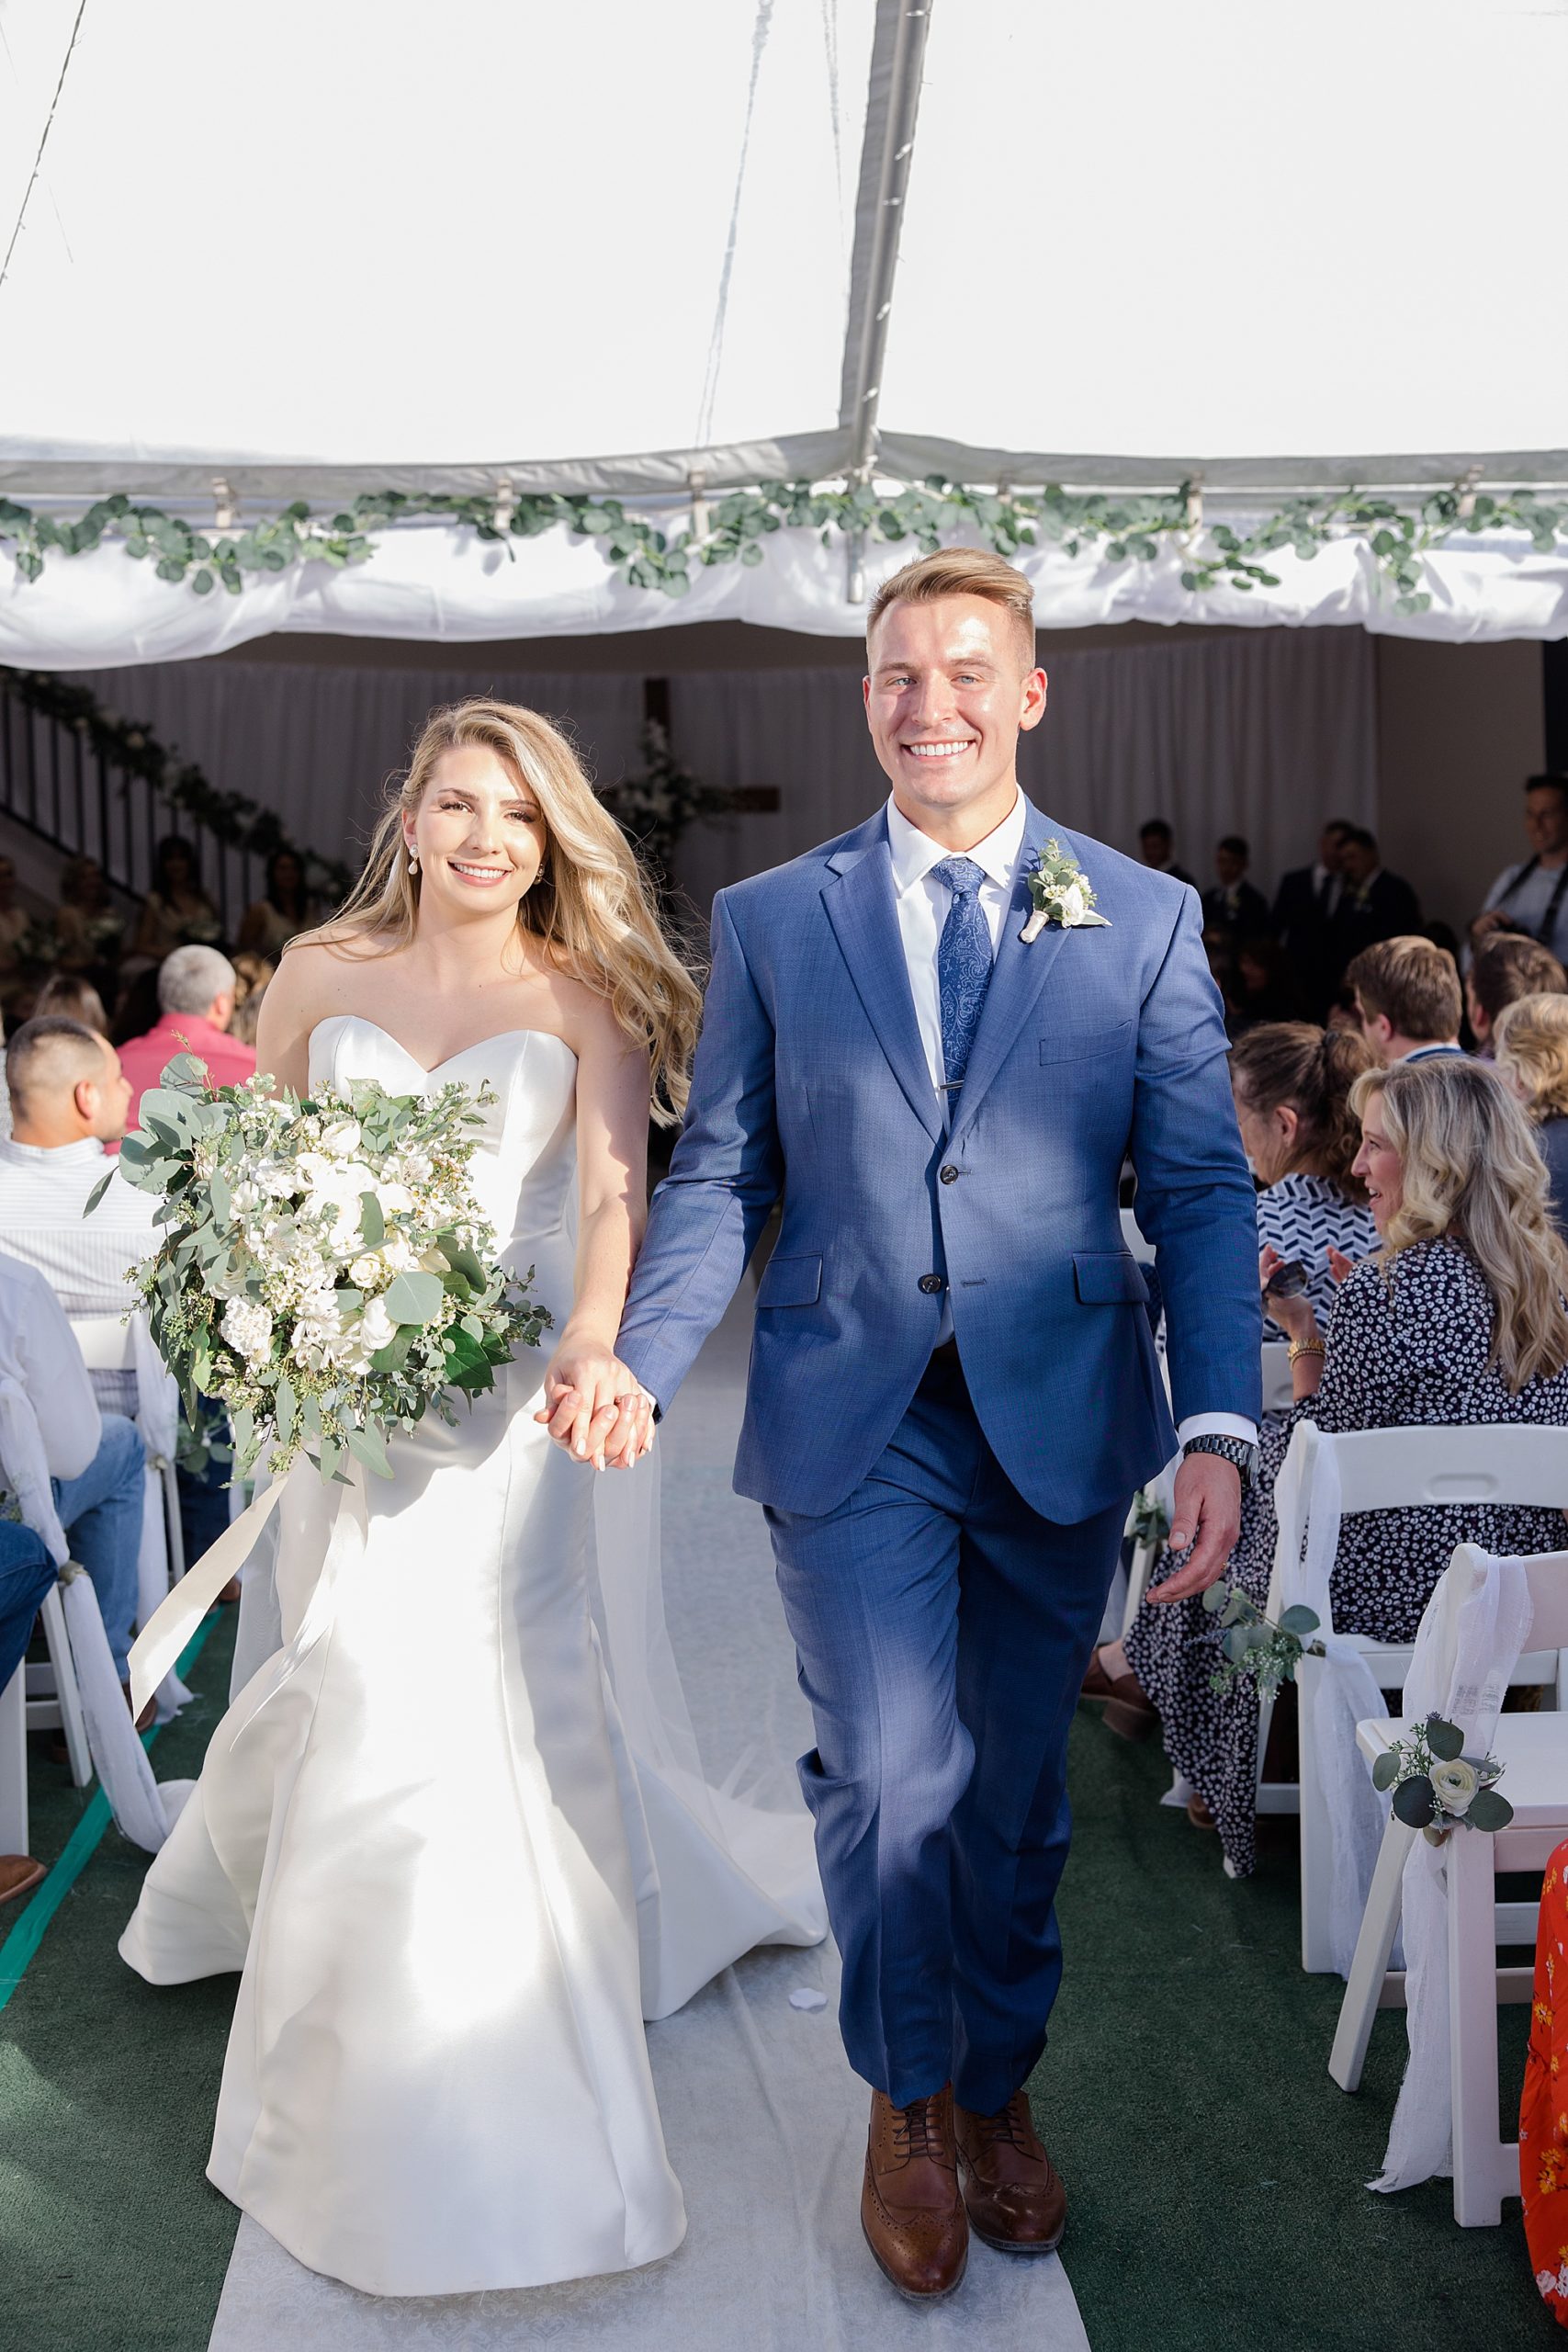 newlyweds walk down aisle after wedding ceremony on private farm in New Mexico